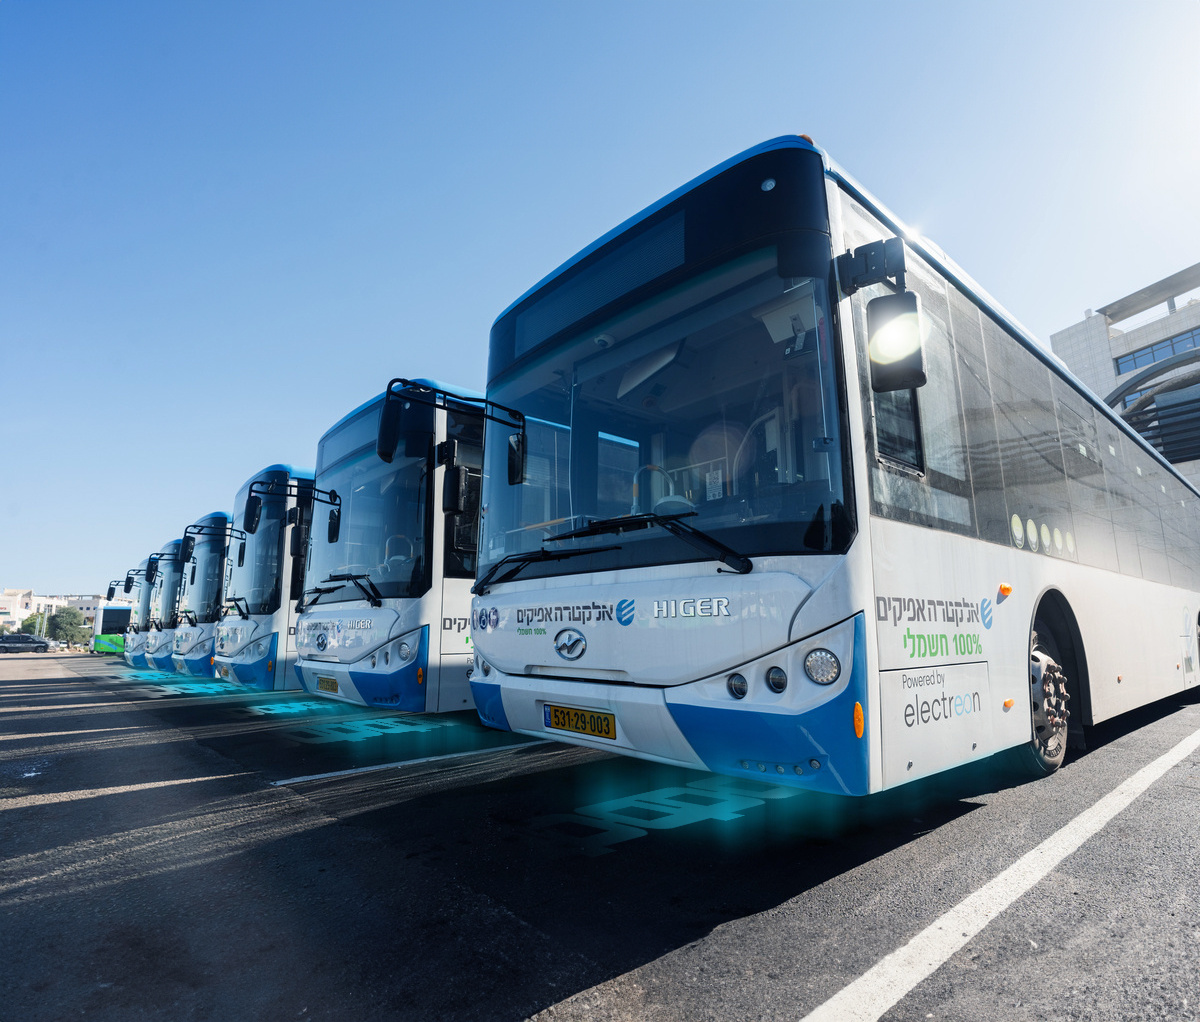 A row of electric busses at Electreon's first wireless charging bus terminal. 